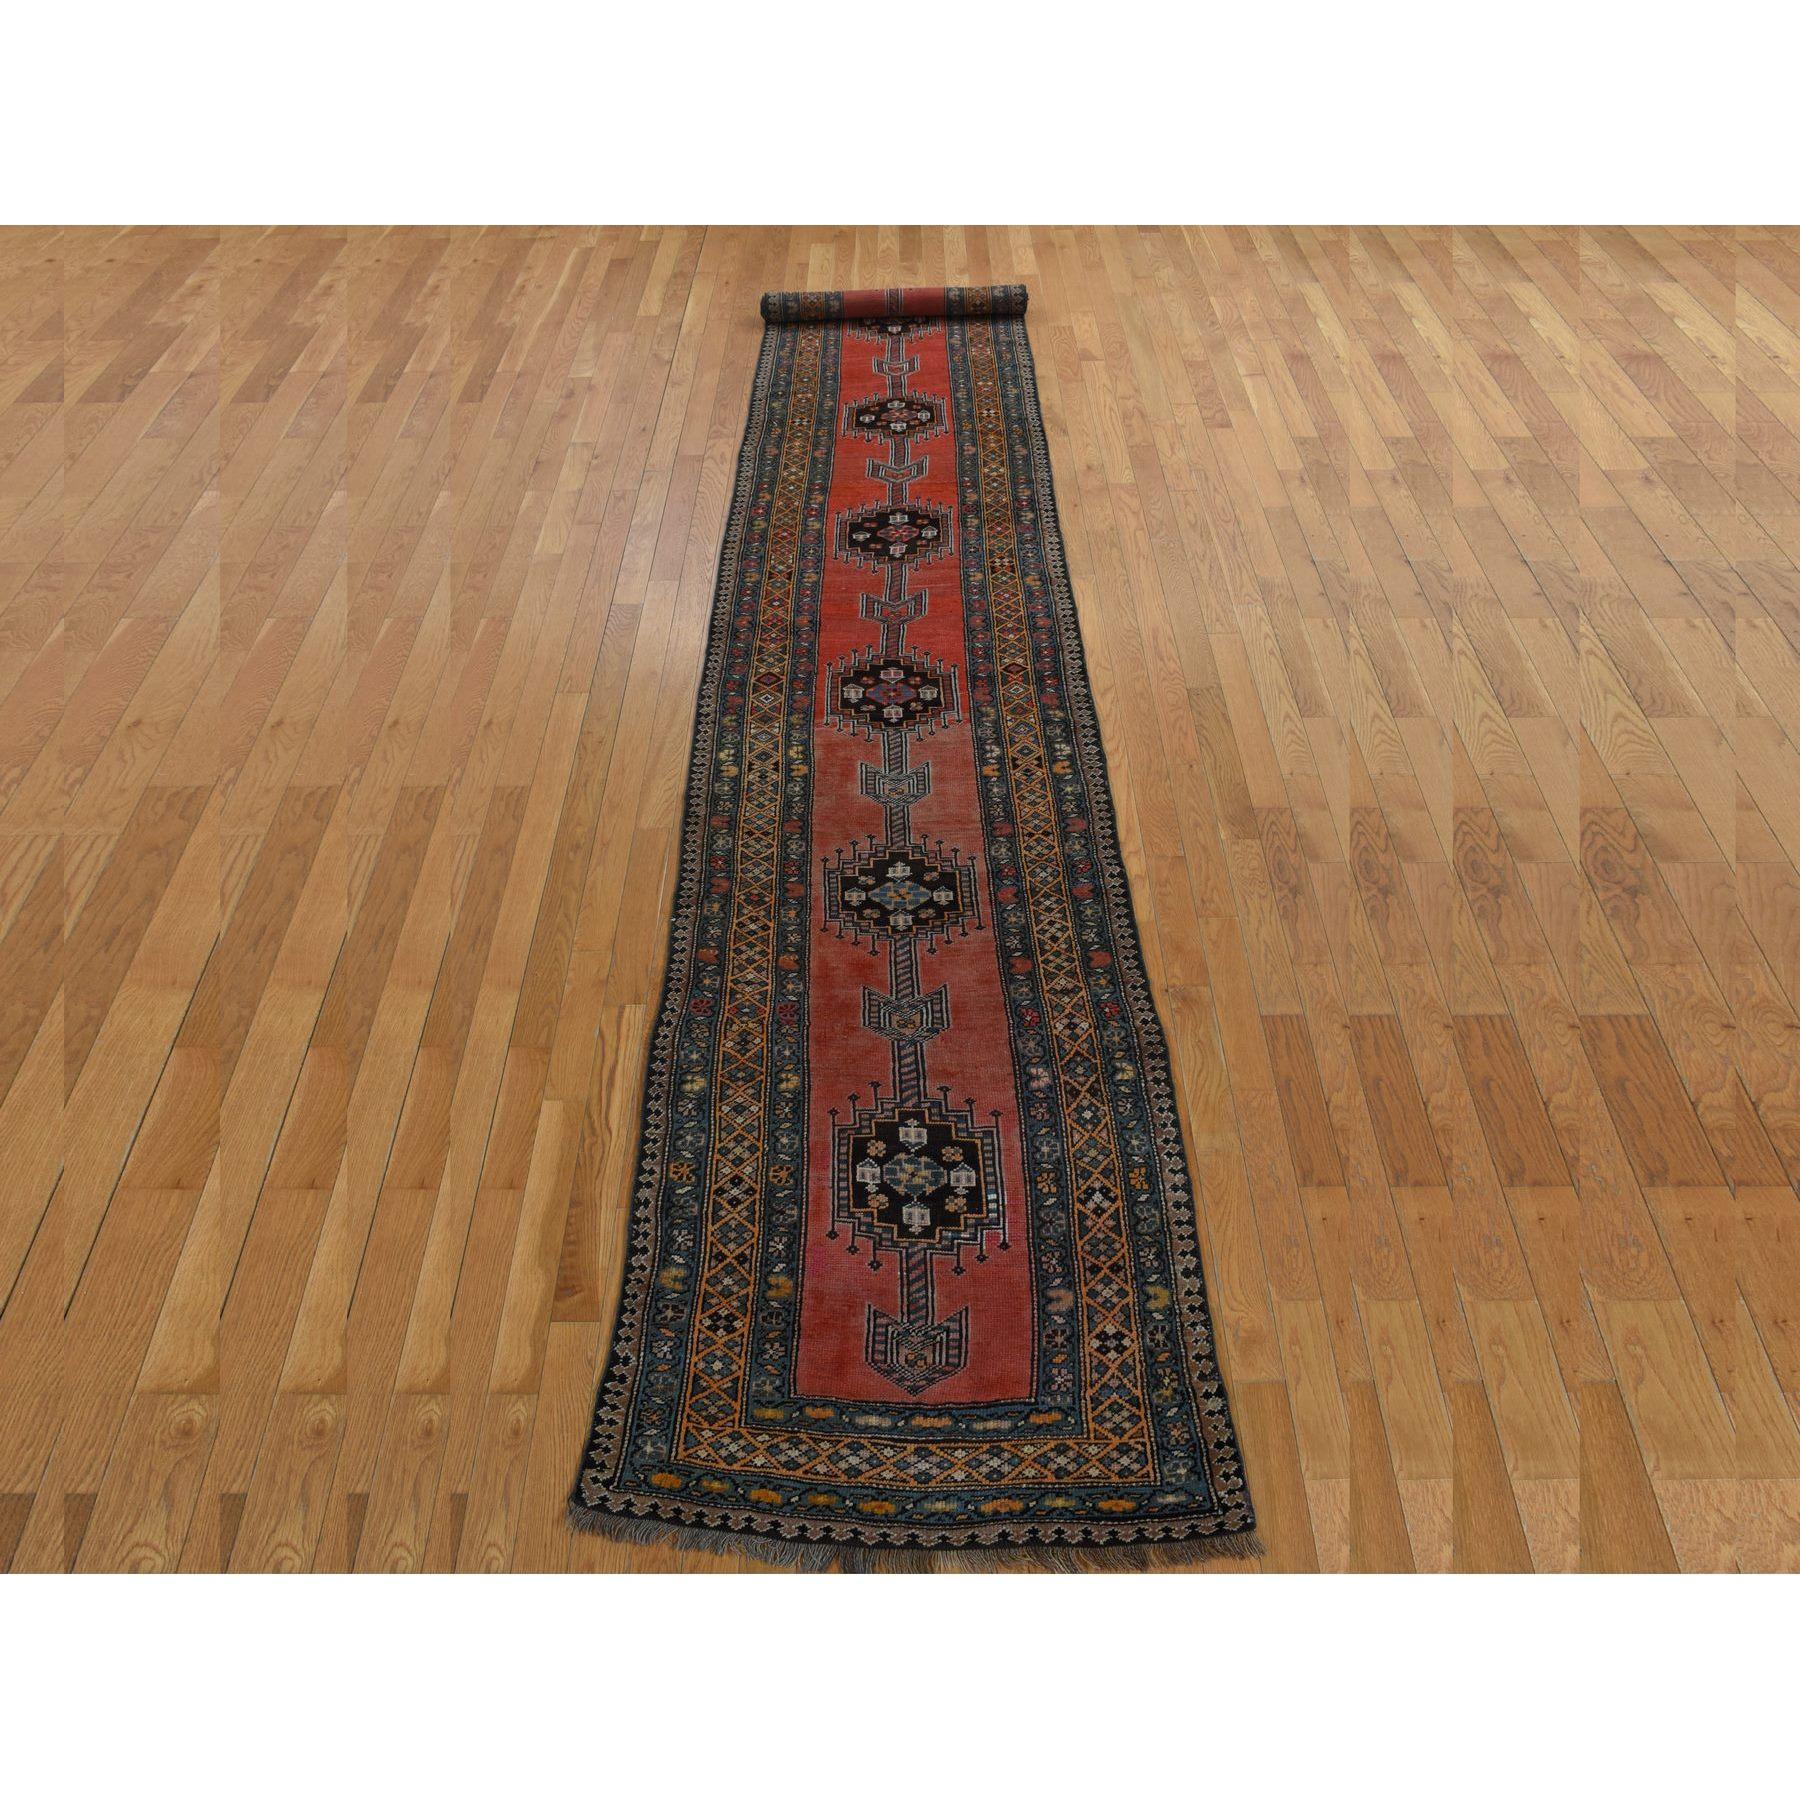 This fabulous Hand-Knotted carpet has been created and designed for extra strength and durability. This rug has been handcrafted for weeks in the traditional method that is used to make
Exact Rug Size in Feet and Inches : 3' x 16'3